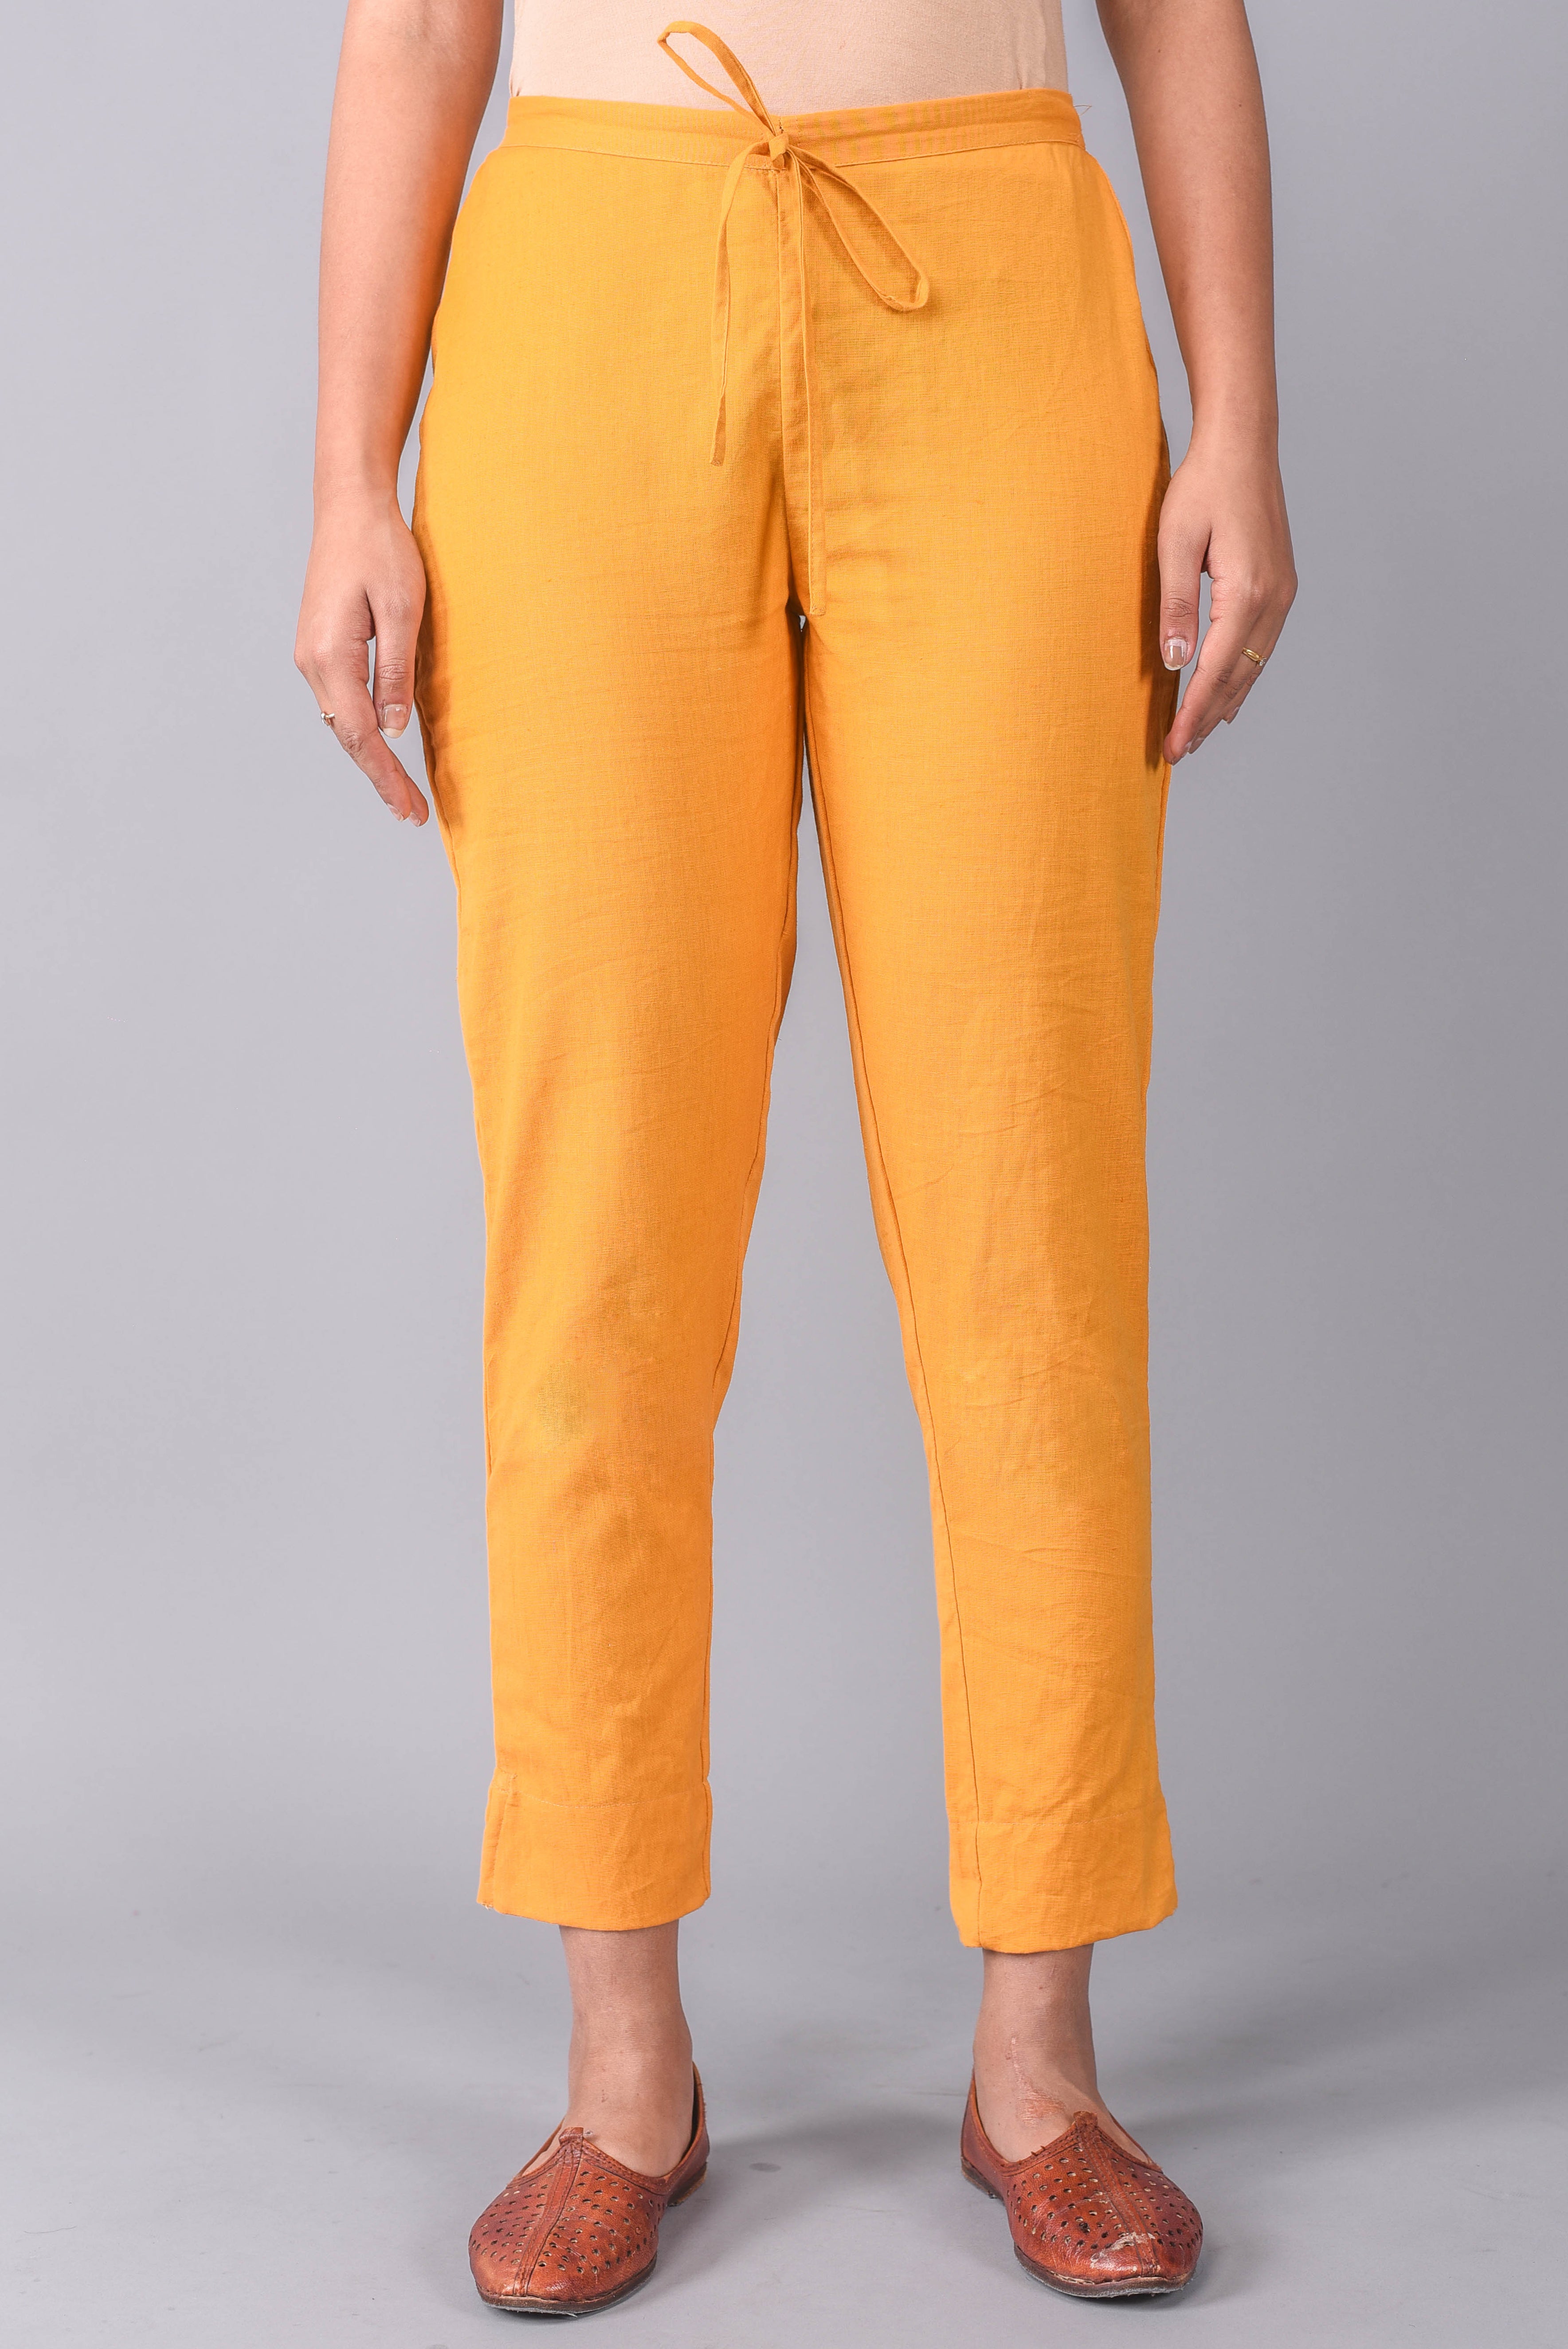 Buy Yellow Trousers & Pants for Women by Jaipurethnicweaves Online |  Ajio.com